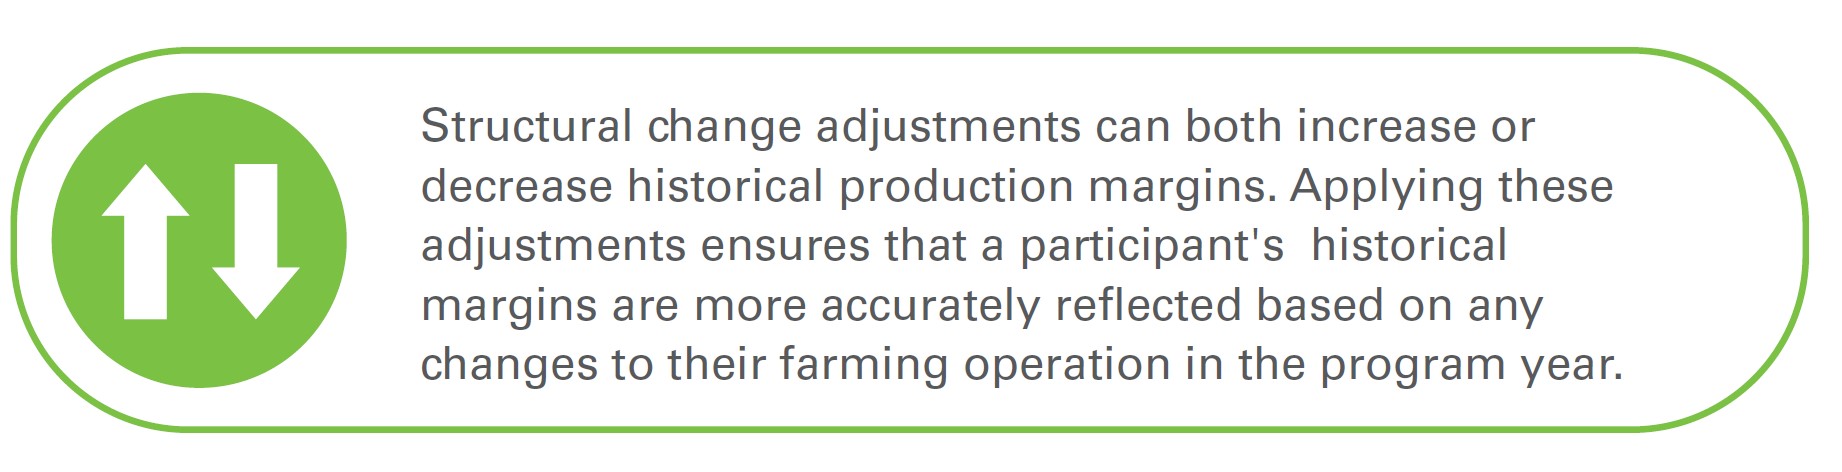 Structural change adjustments can both increase or decrease historical production margins. Applying these adjustments ensures that a participant's historical margins are more accurately reflected based on any changes to their farming operation in the program year.